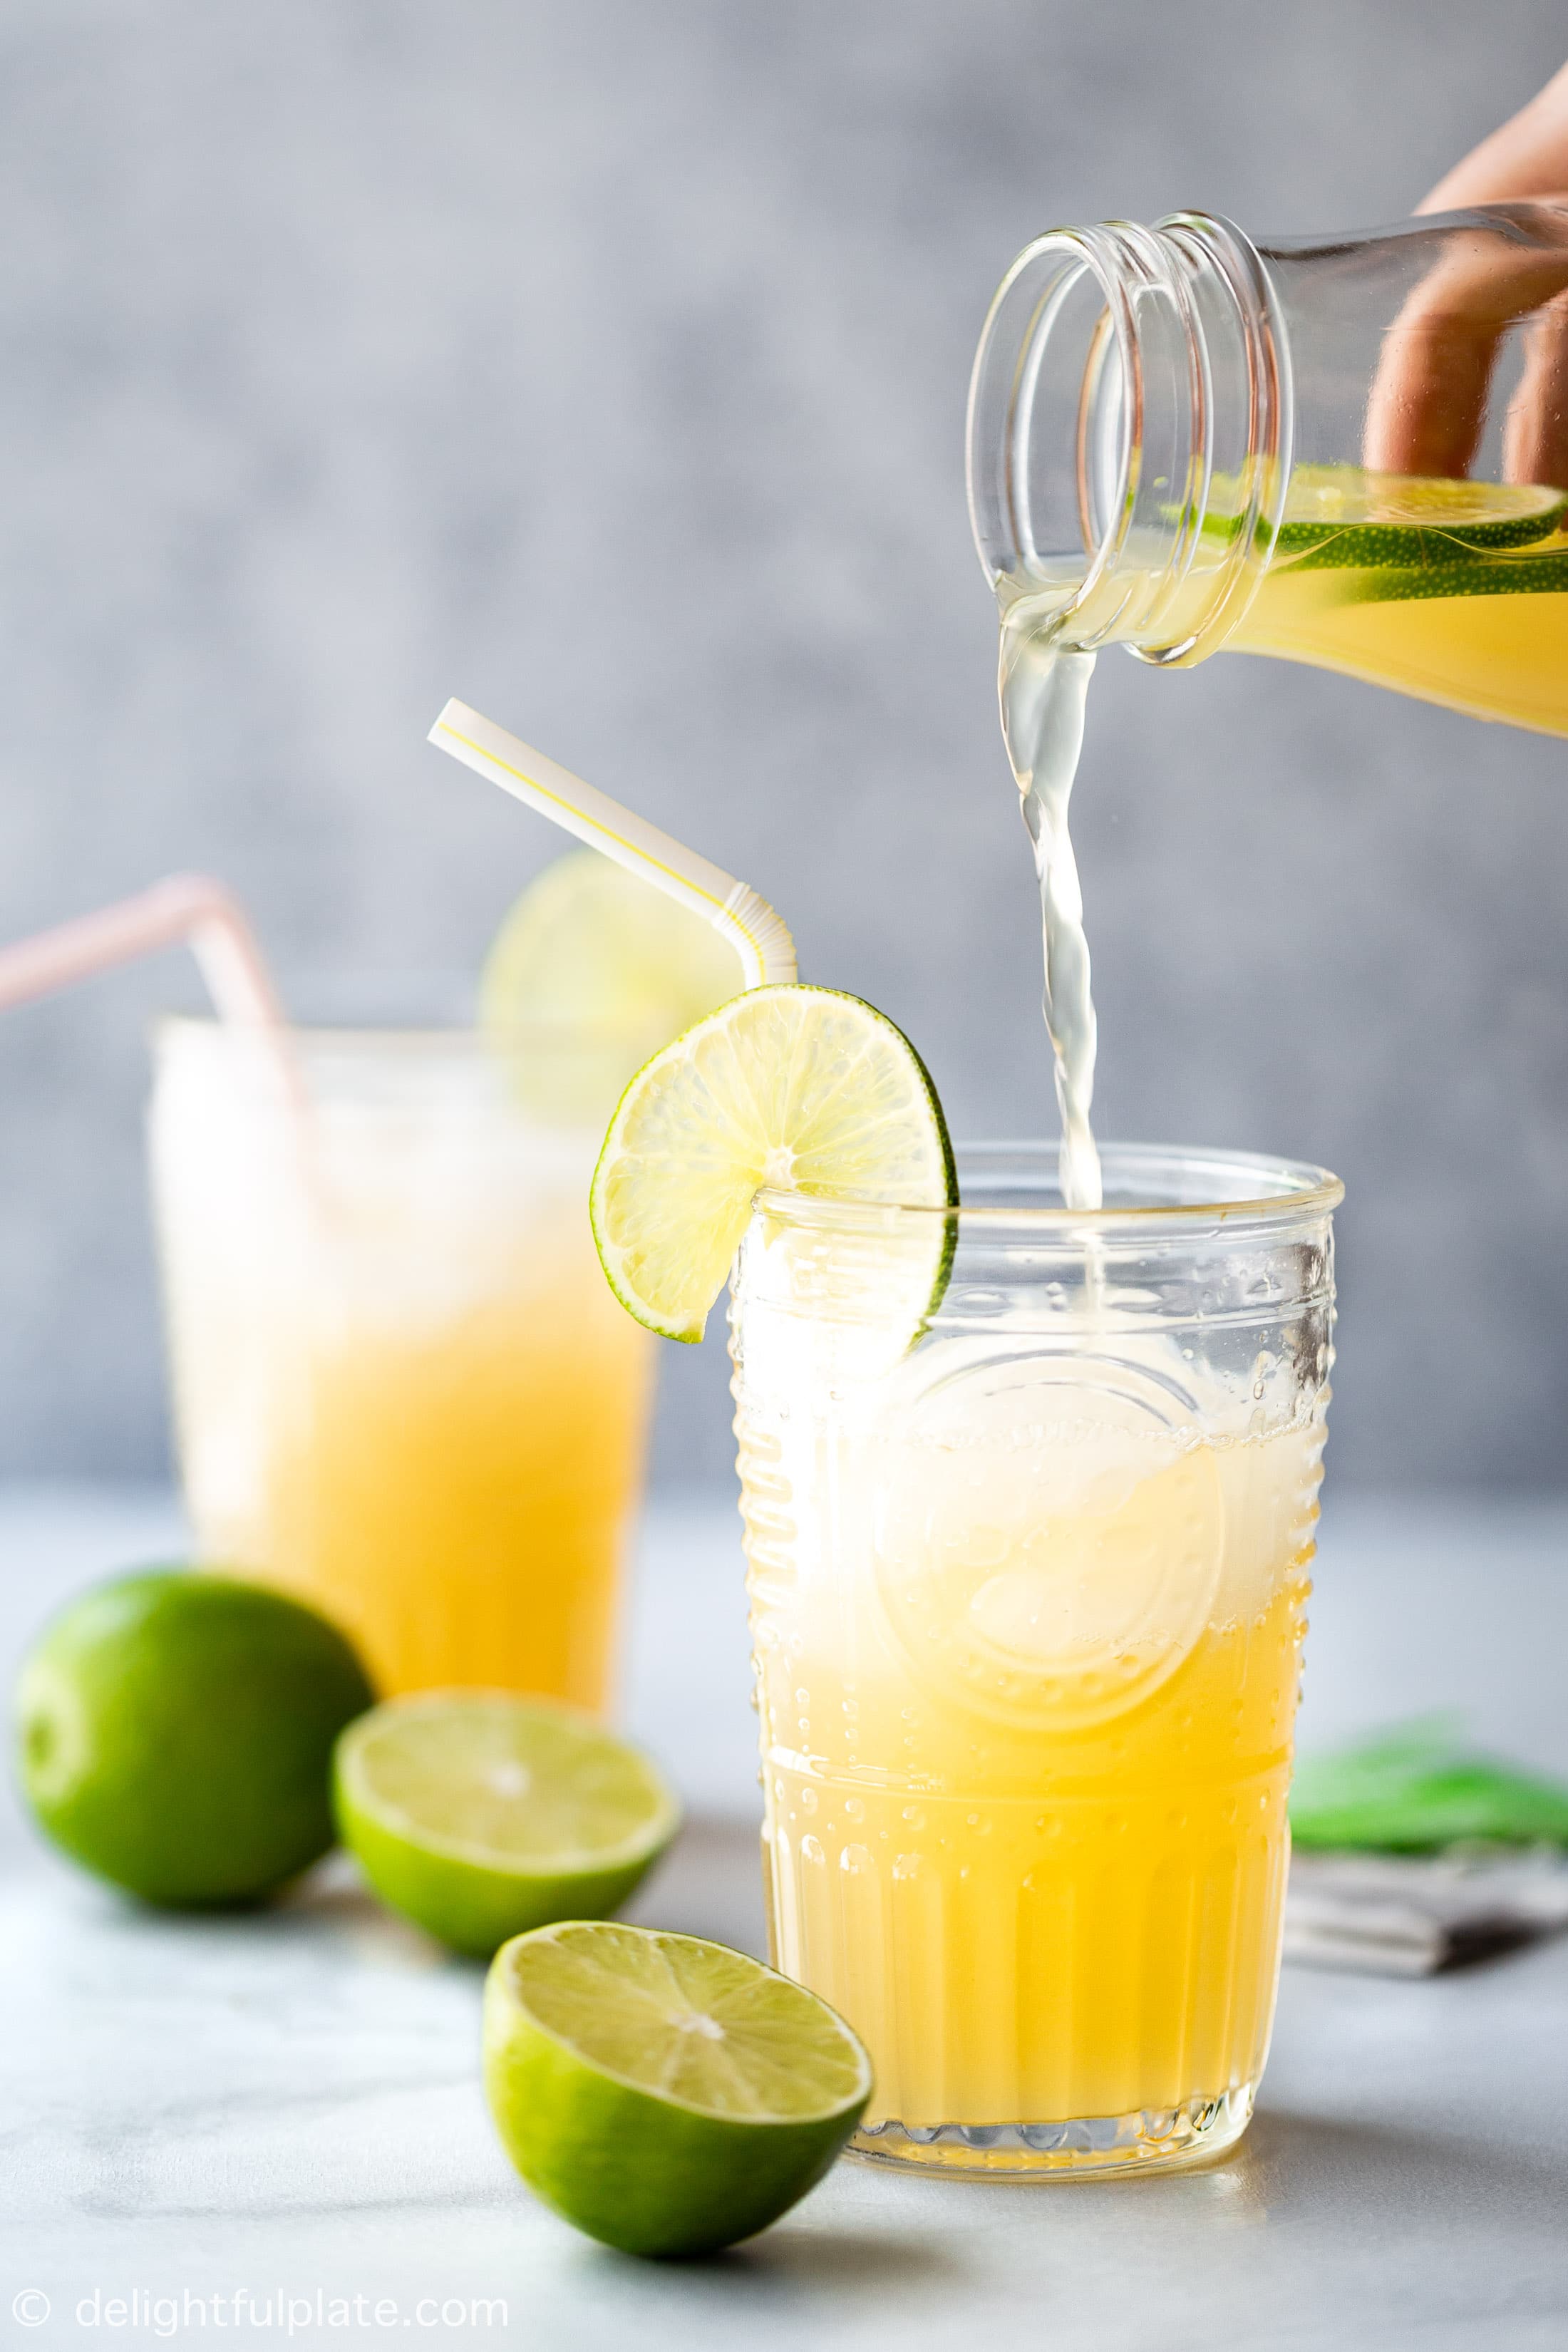 Vietnamese Lime Iced Tea (Tra Chanh Hanoi) is a refreshing drink that is well-loved by young people in Hanoi, Vietnam. You need just a handful of ingredients to make this popular Vietnamese drink.